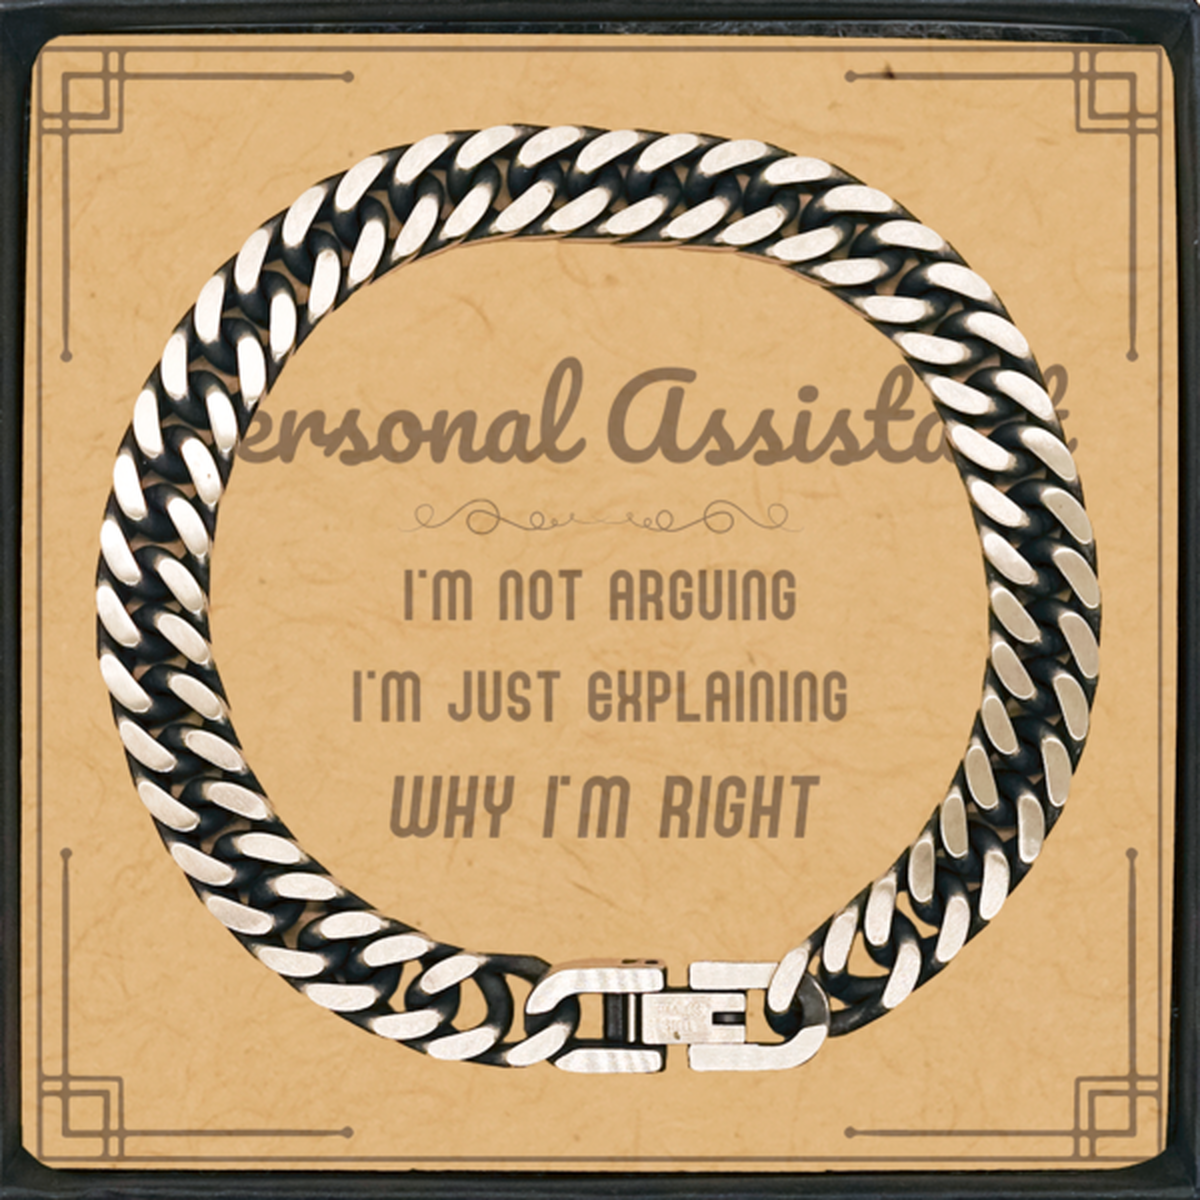 Personal Assistant I'm not Arguing. I'm Just Explaining Why I'm RIGHT Cuban Link Chain Bracelet, Funny Saying Quote Personal Assistant Gifts For Personal Assistant Message Card Graduation Birthday Christmas Gifts for Men Women Coworker